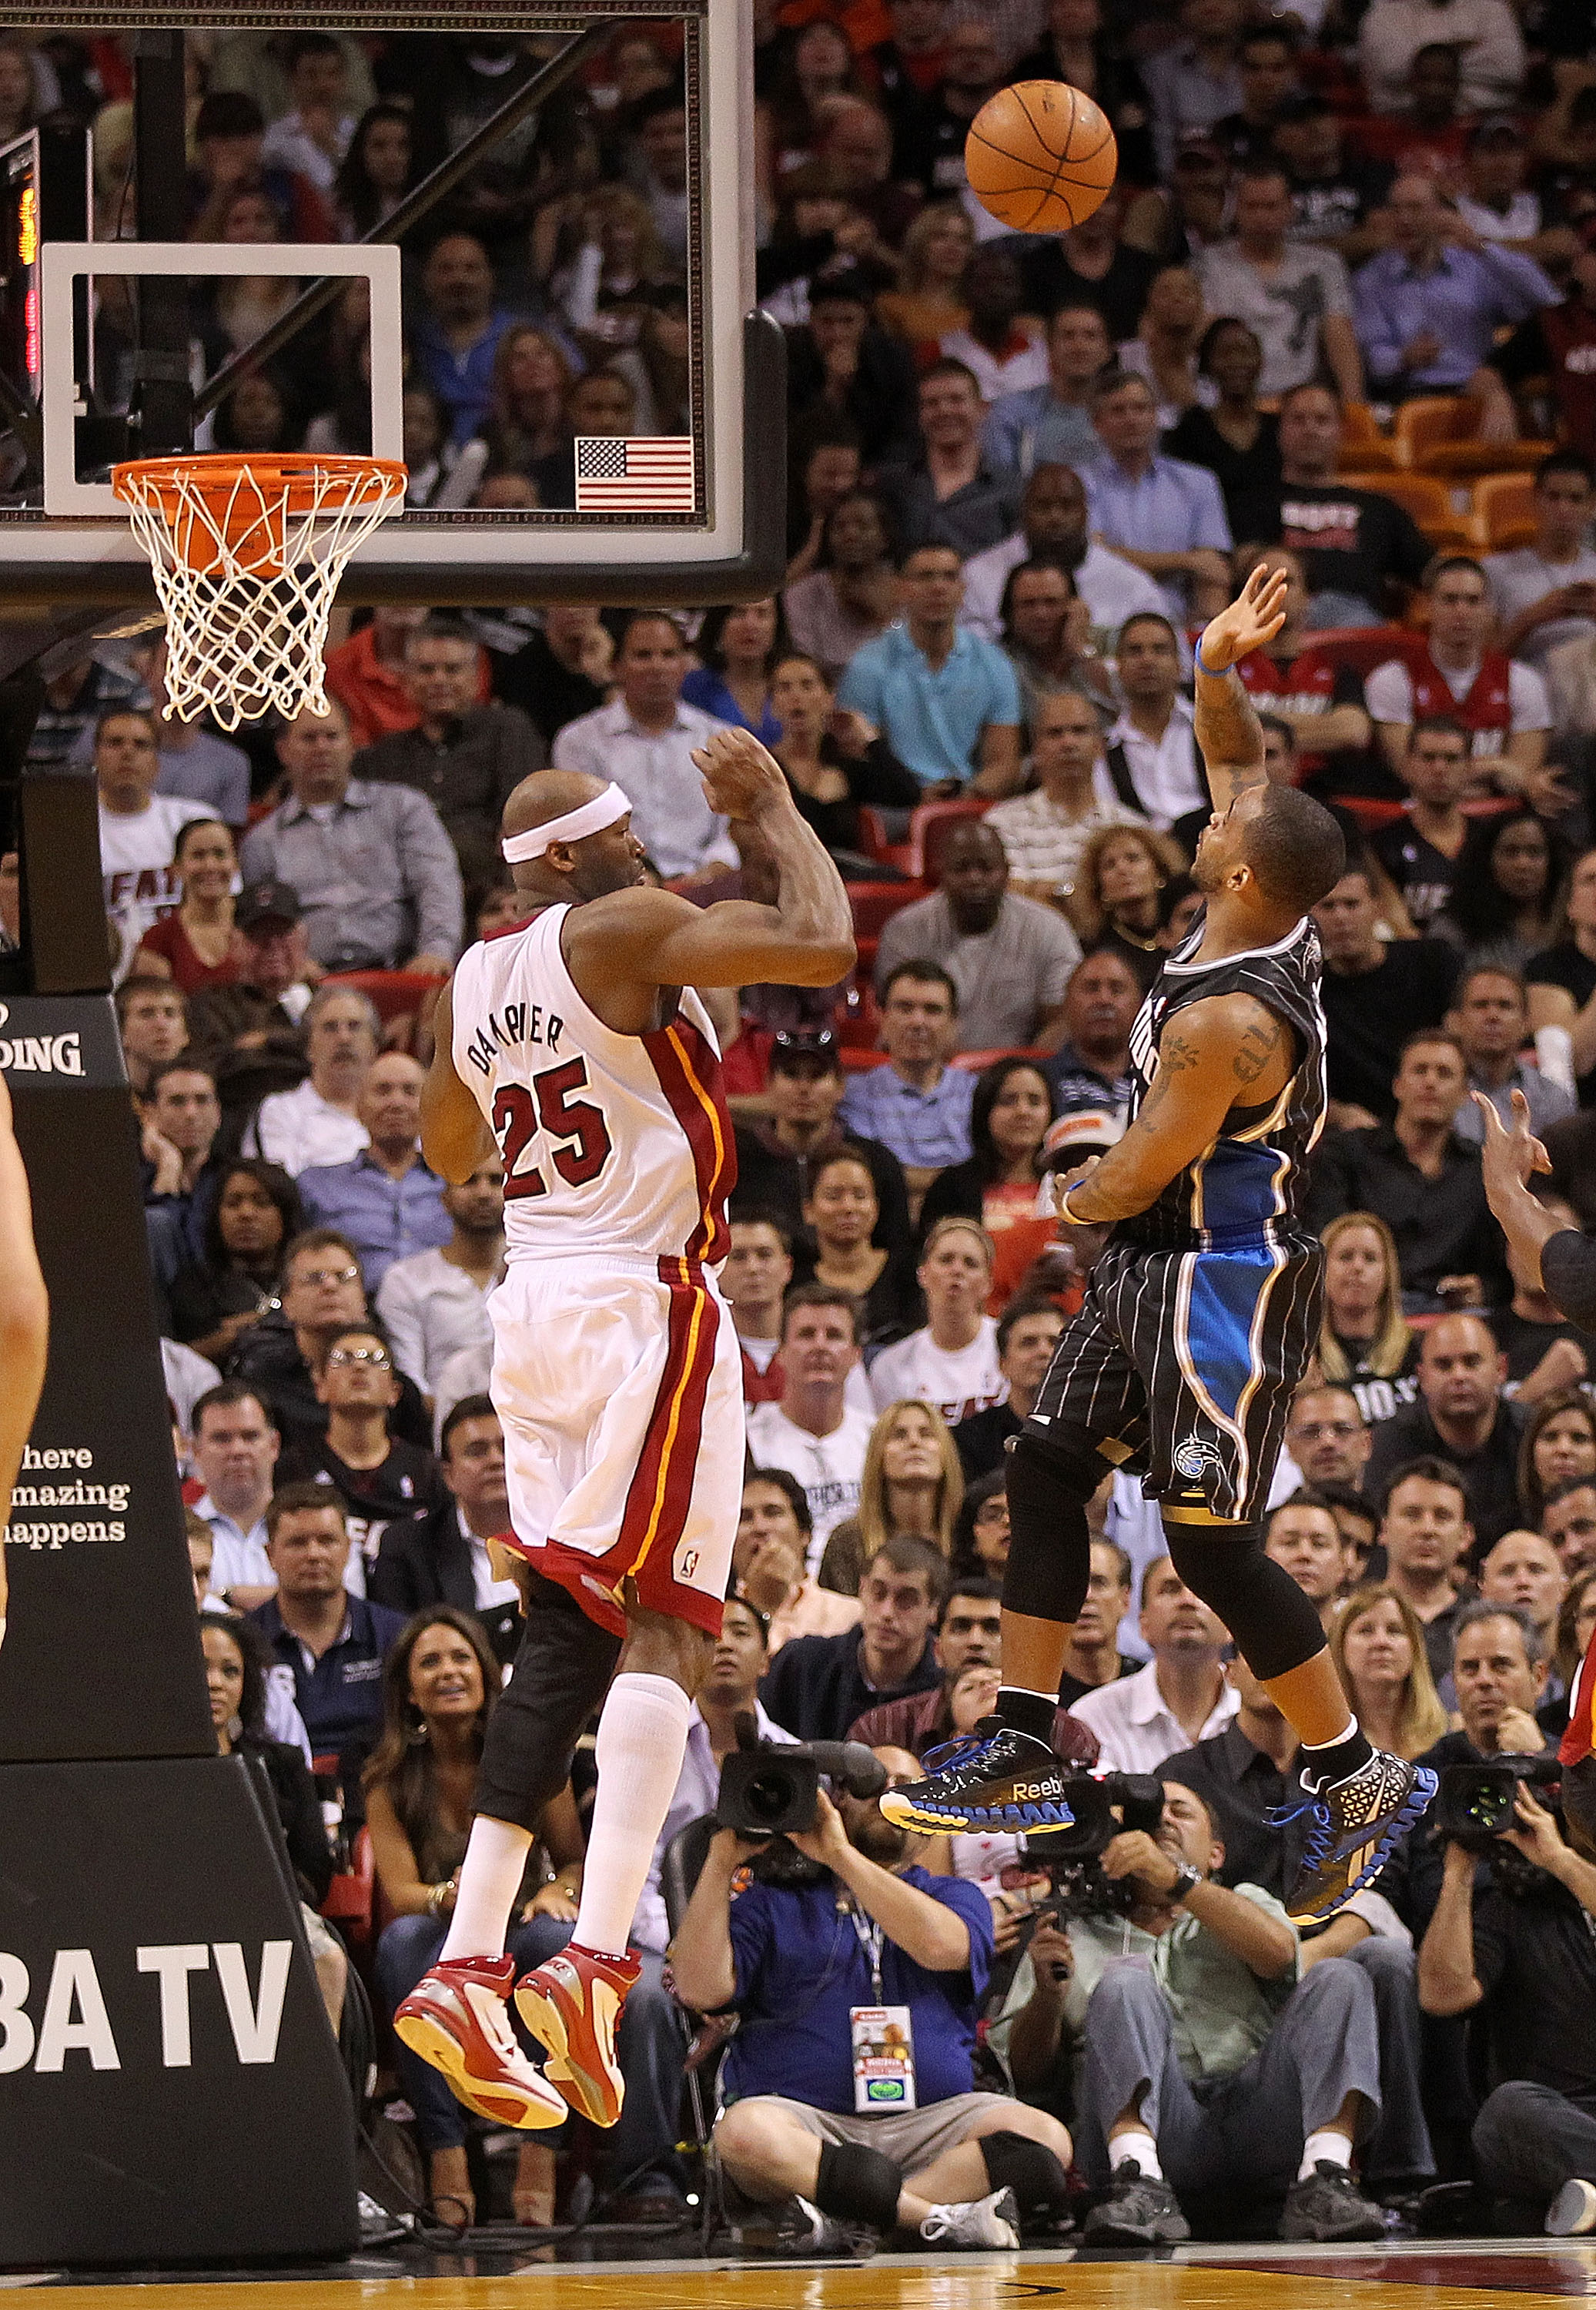 MIAMI, FL - MARCH 03:  Jameer Nelson #14 of the Orlando Magic shoots over Eric Dampier #25 of the Miami Heat during a game at American Airlines Arena on March 3, 2011 in Miami, Florida. NOTE TO USER: User expressly acknowledges and agrees that, by downloa